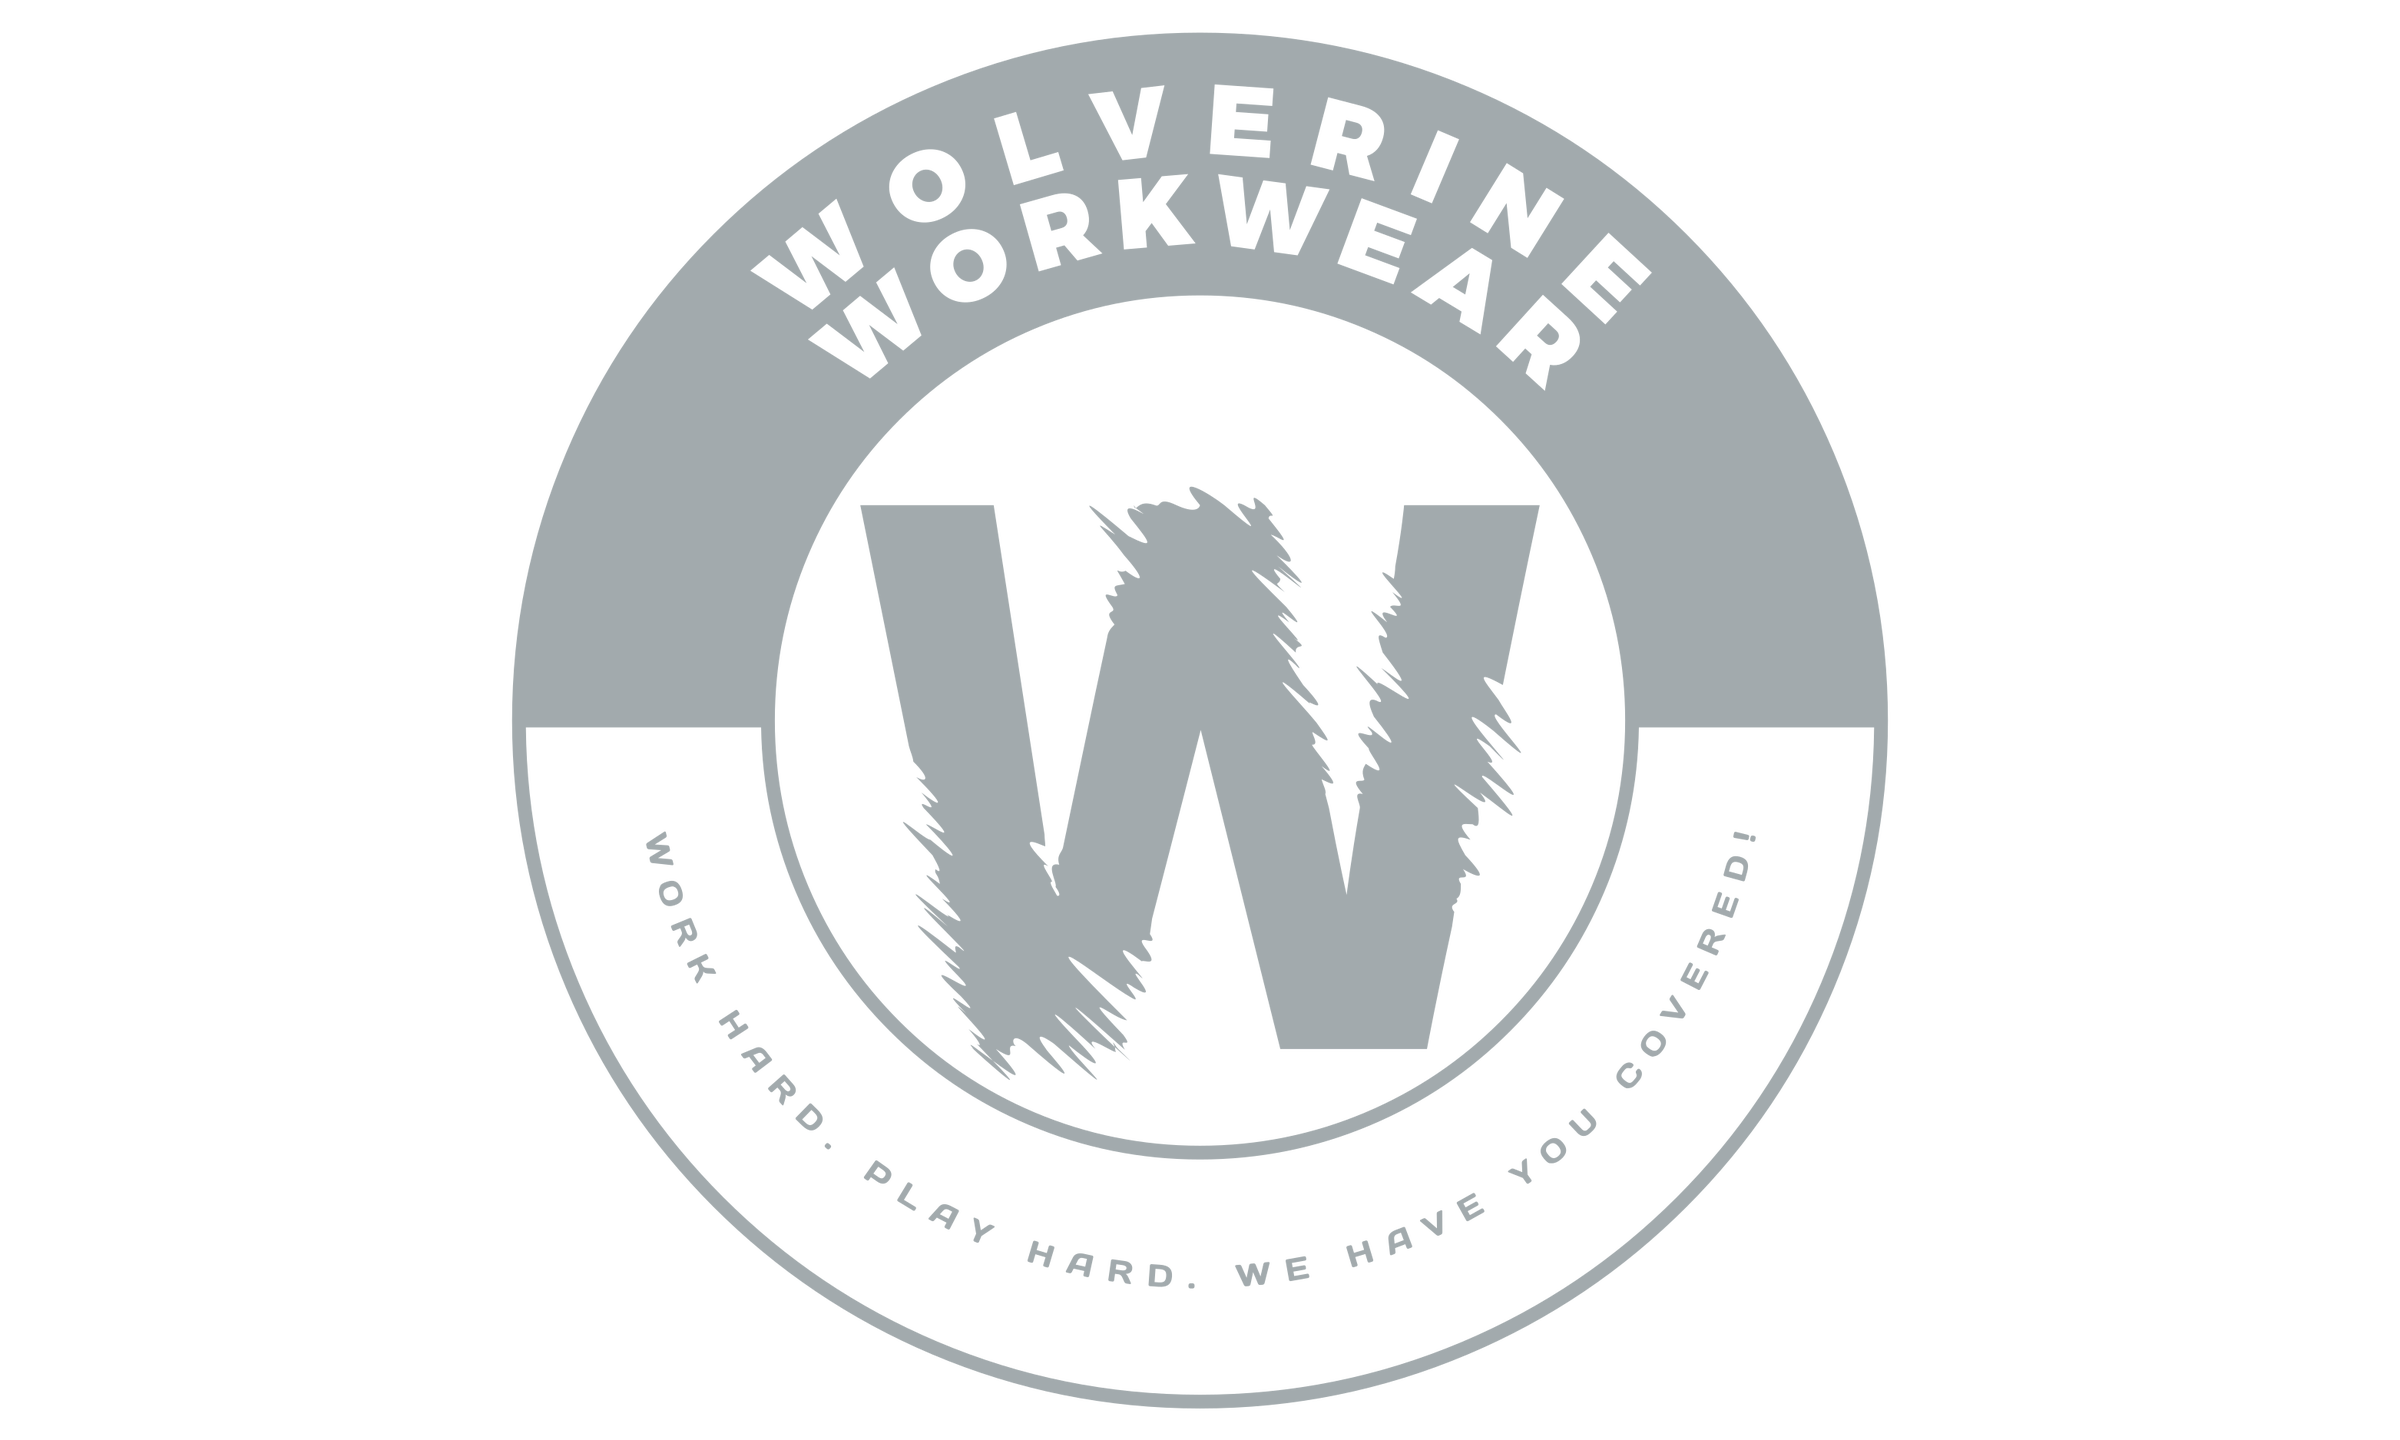 Home of Wolverine Workwear. Work Hard, Play Hard, We Have You Covered!